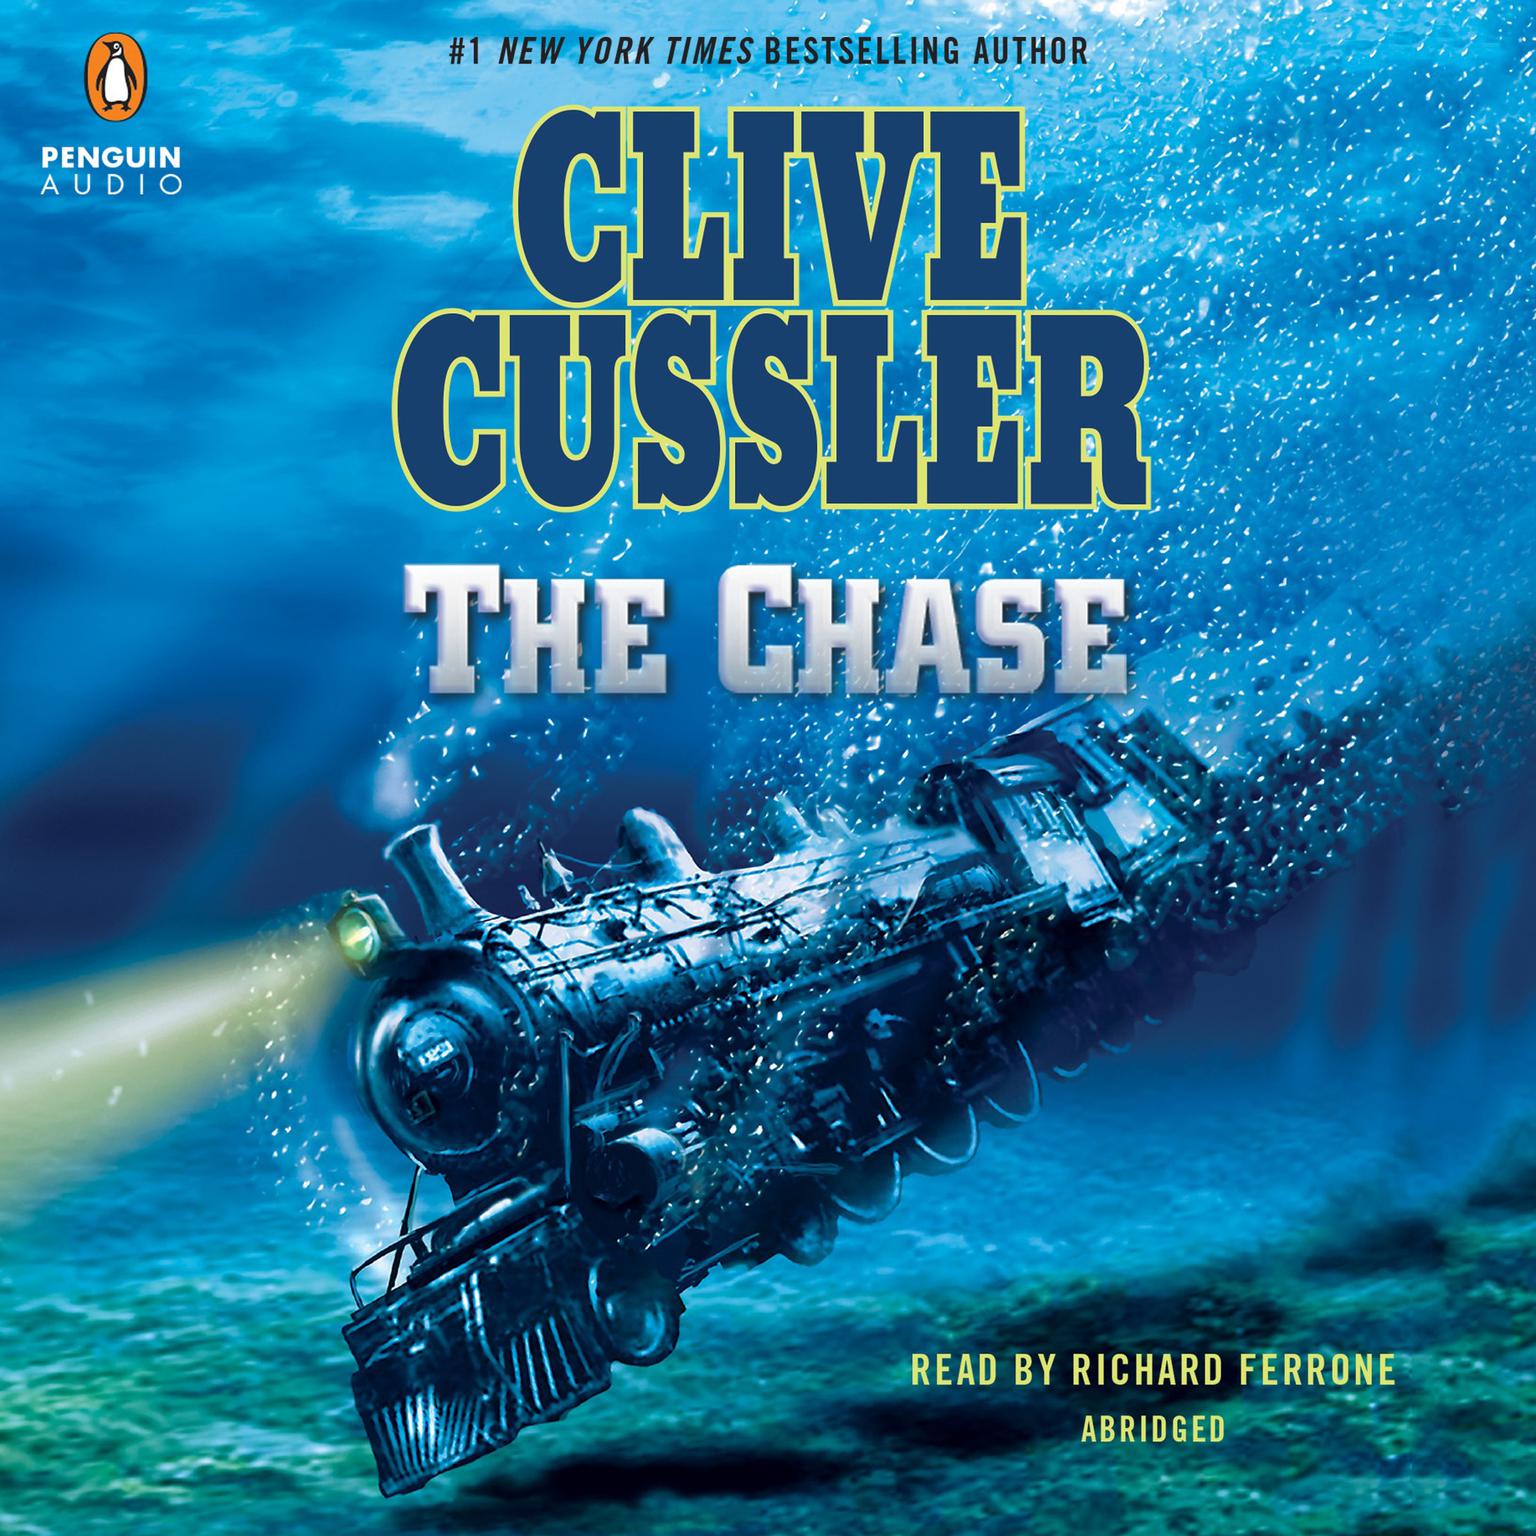 The Chase (Abridged) Audiobook, by Clive Cussler